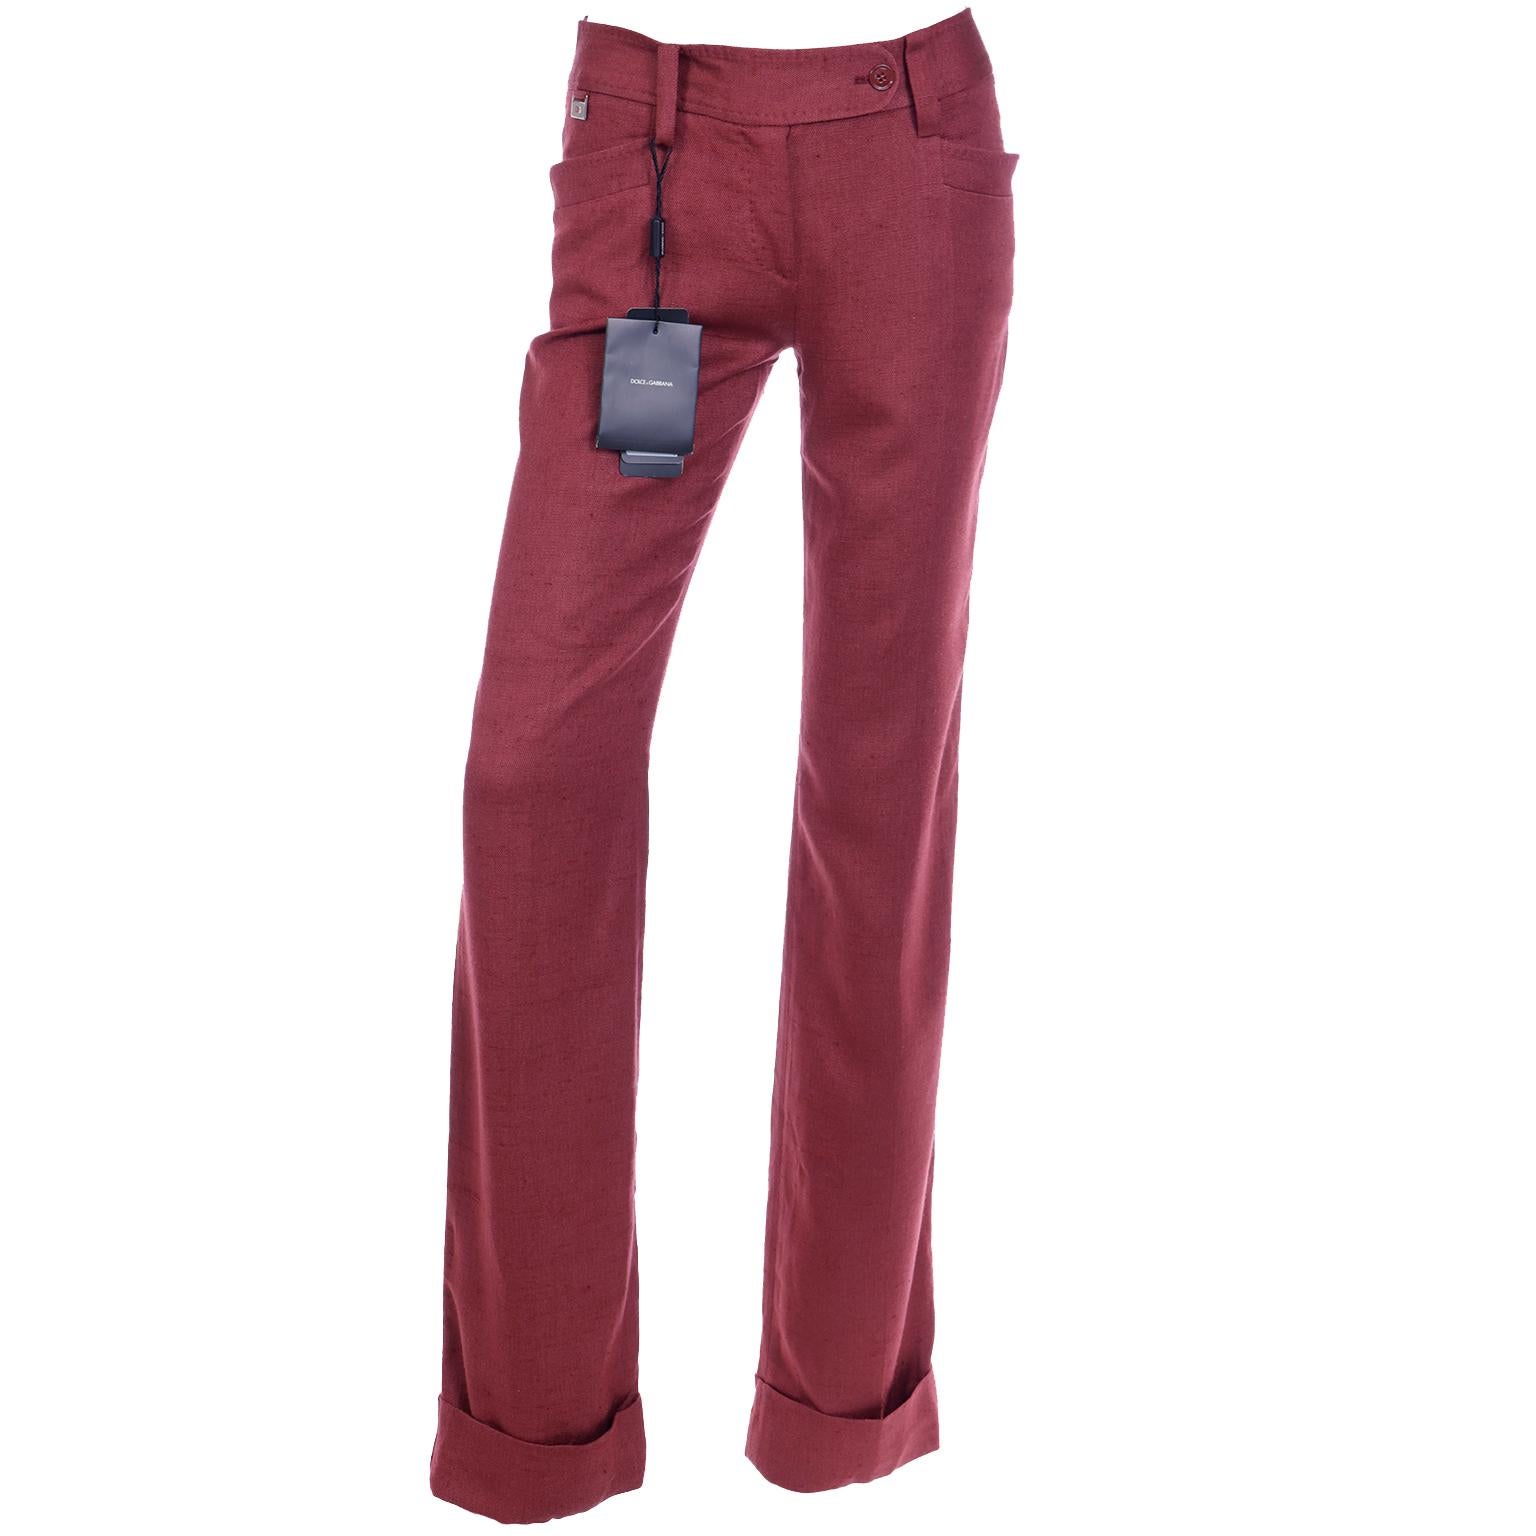 Dolce & Gabbana Cardinal Red 100% Silk Trousers Deadstock with Original Tags For Sale 5